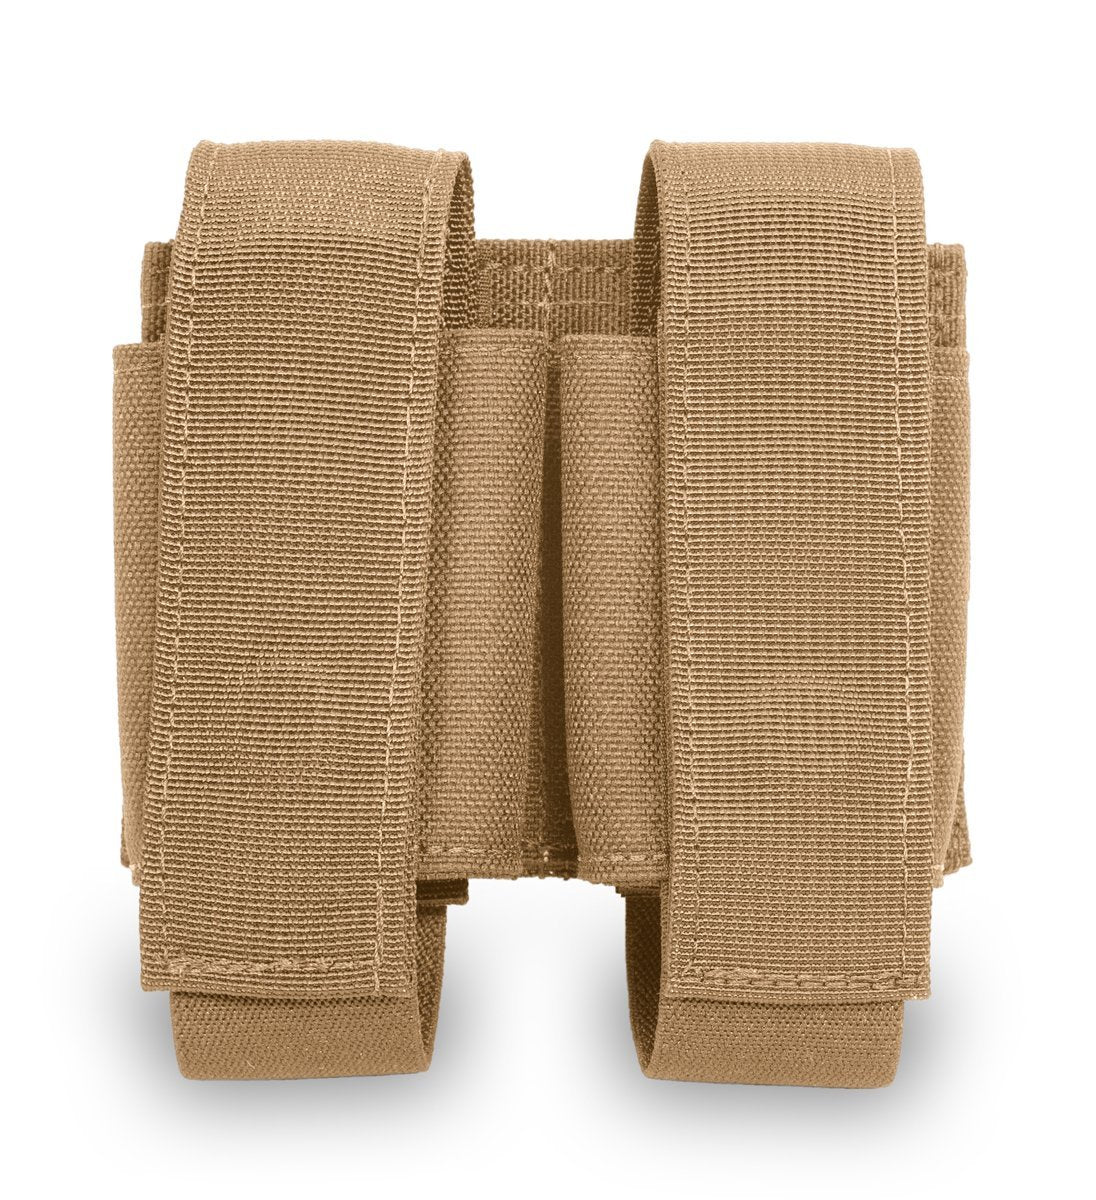 A beige tactical belt with multiple compartments, including an Elite Survival Systems Molle Grenade Pouches 40mm and adjustable straps, isolated on a white background.